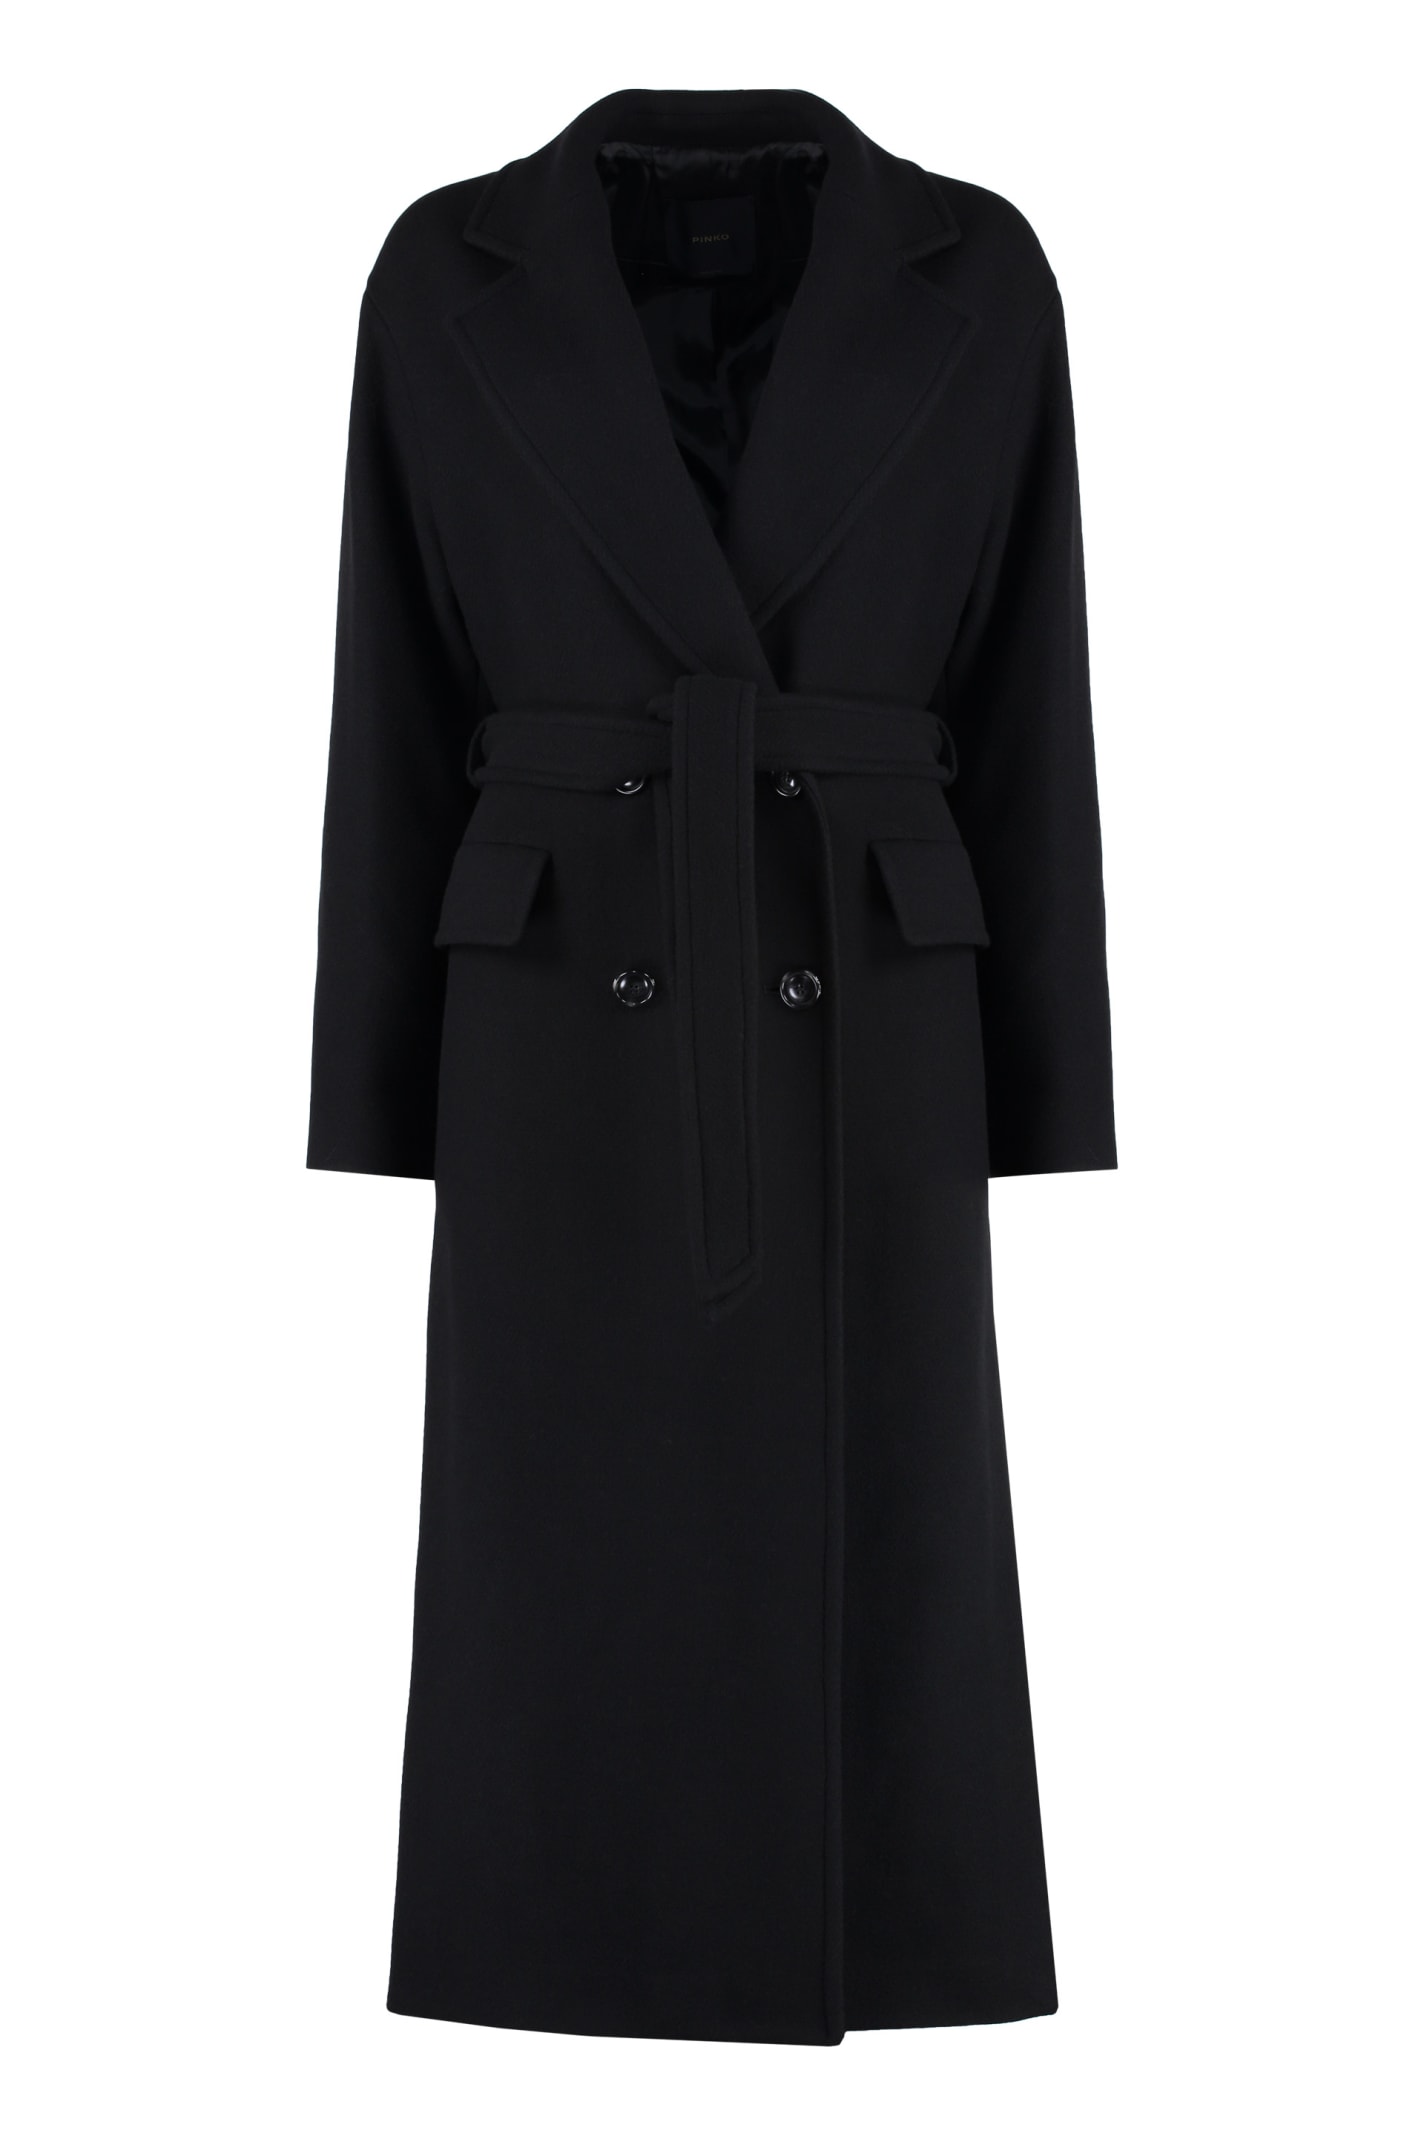 Pinko Giacomo Belted Double-breasted Coat